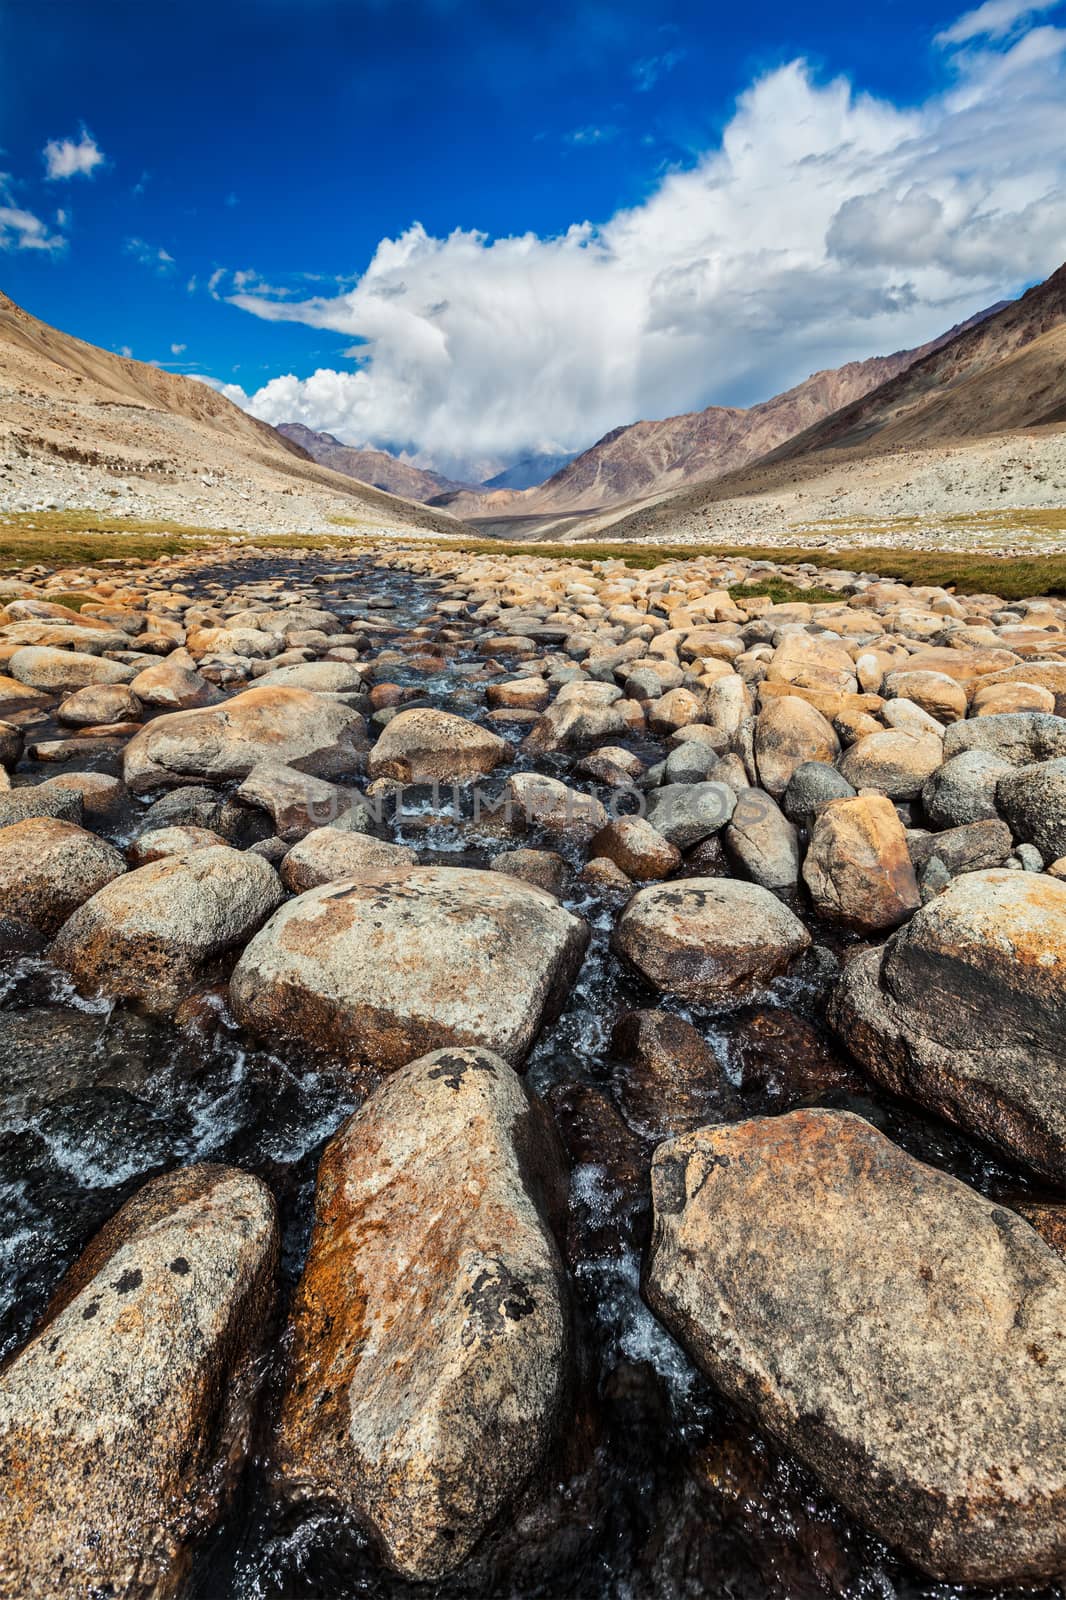 Mountain stream with stones in Himalayas by dimol